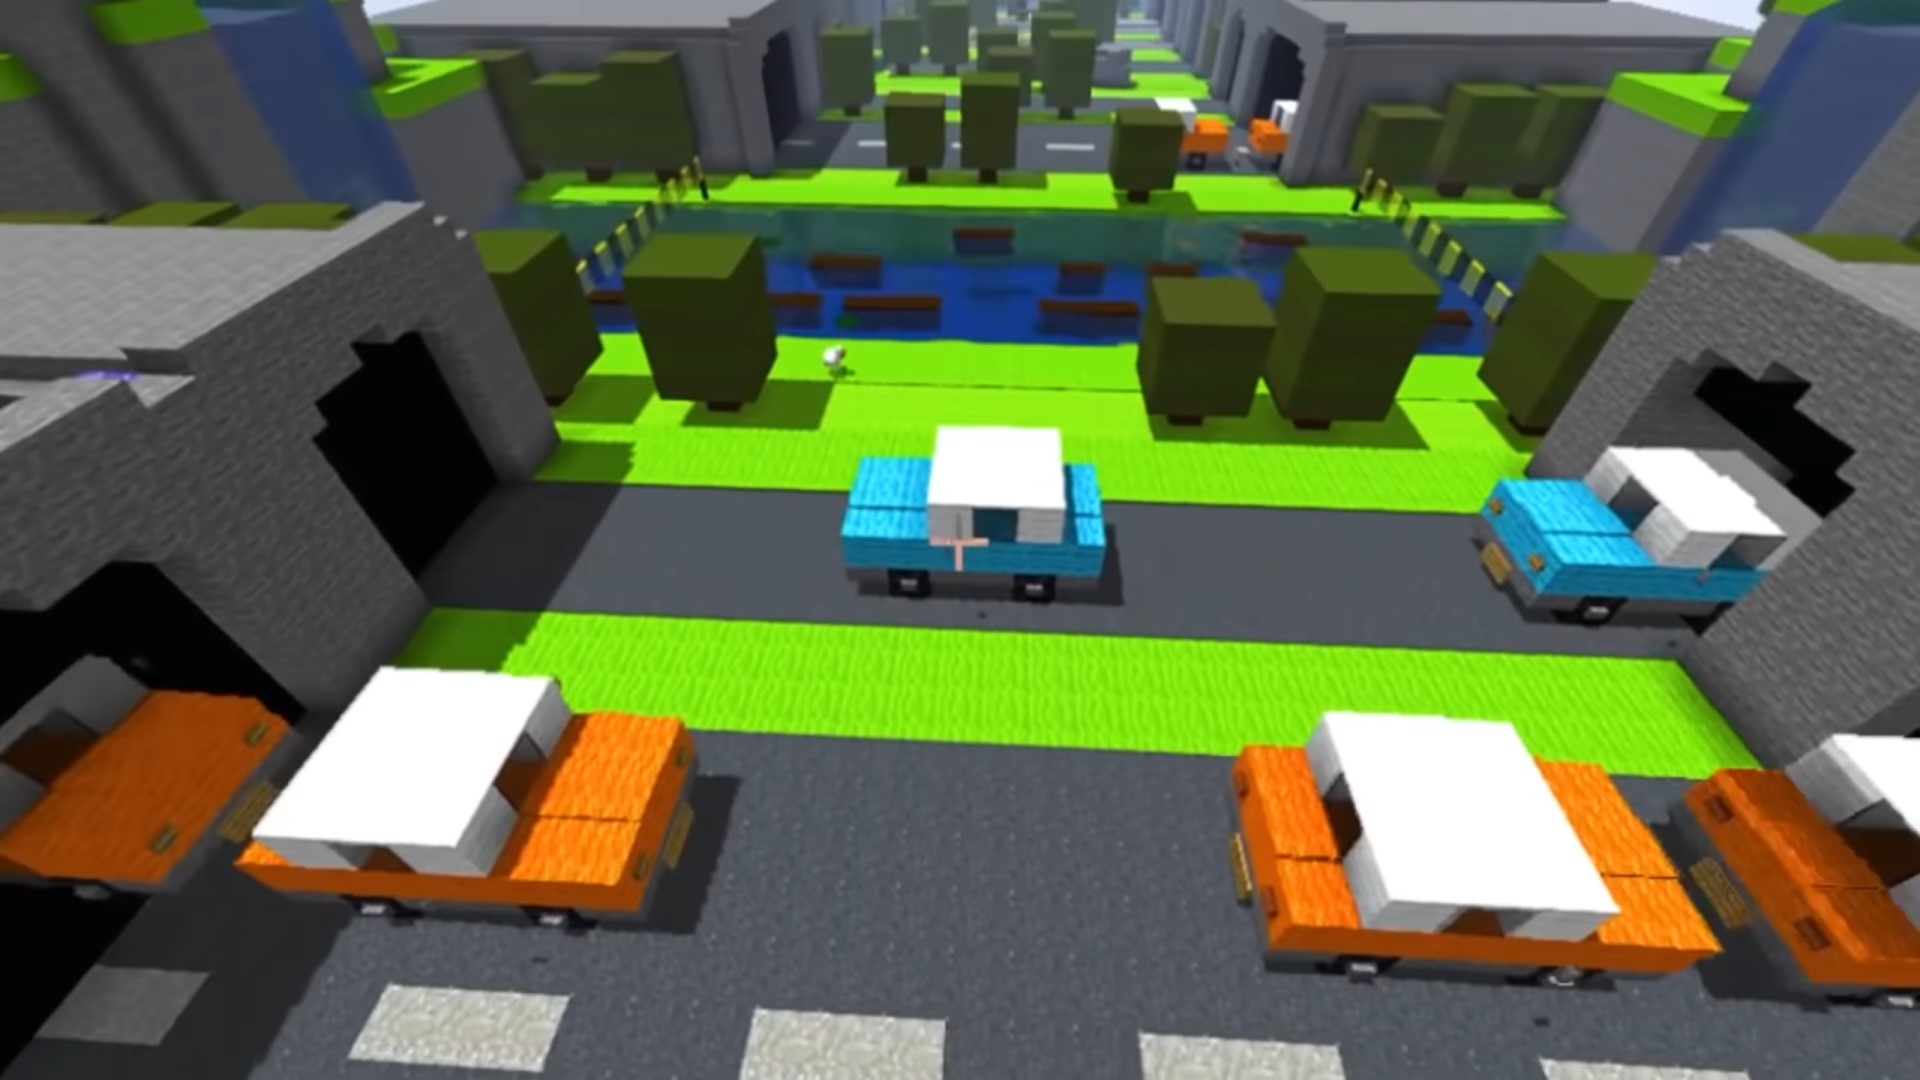 Minecraft got cars, so Crossy Road was the next logical step